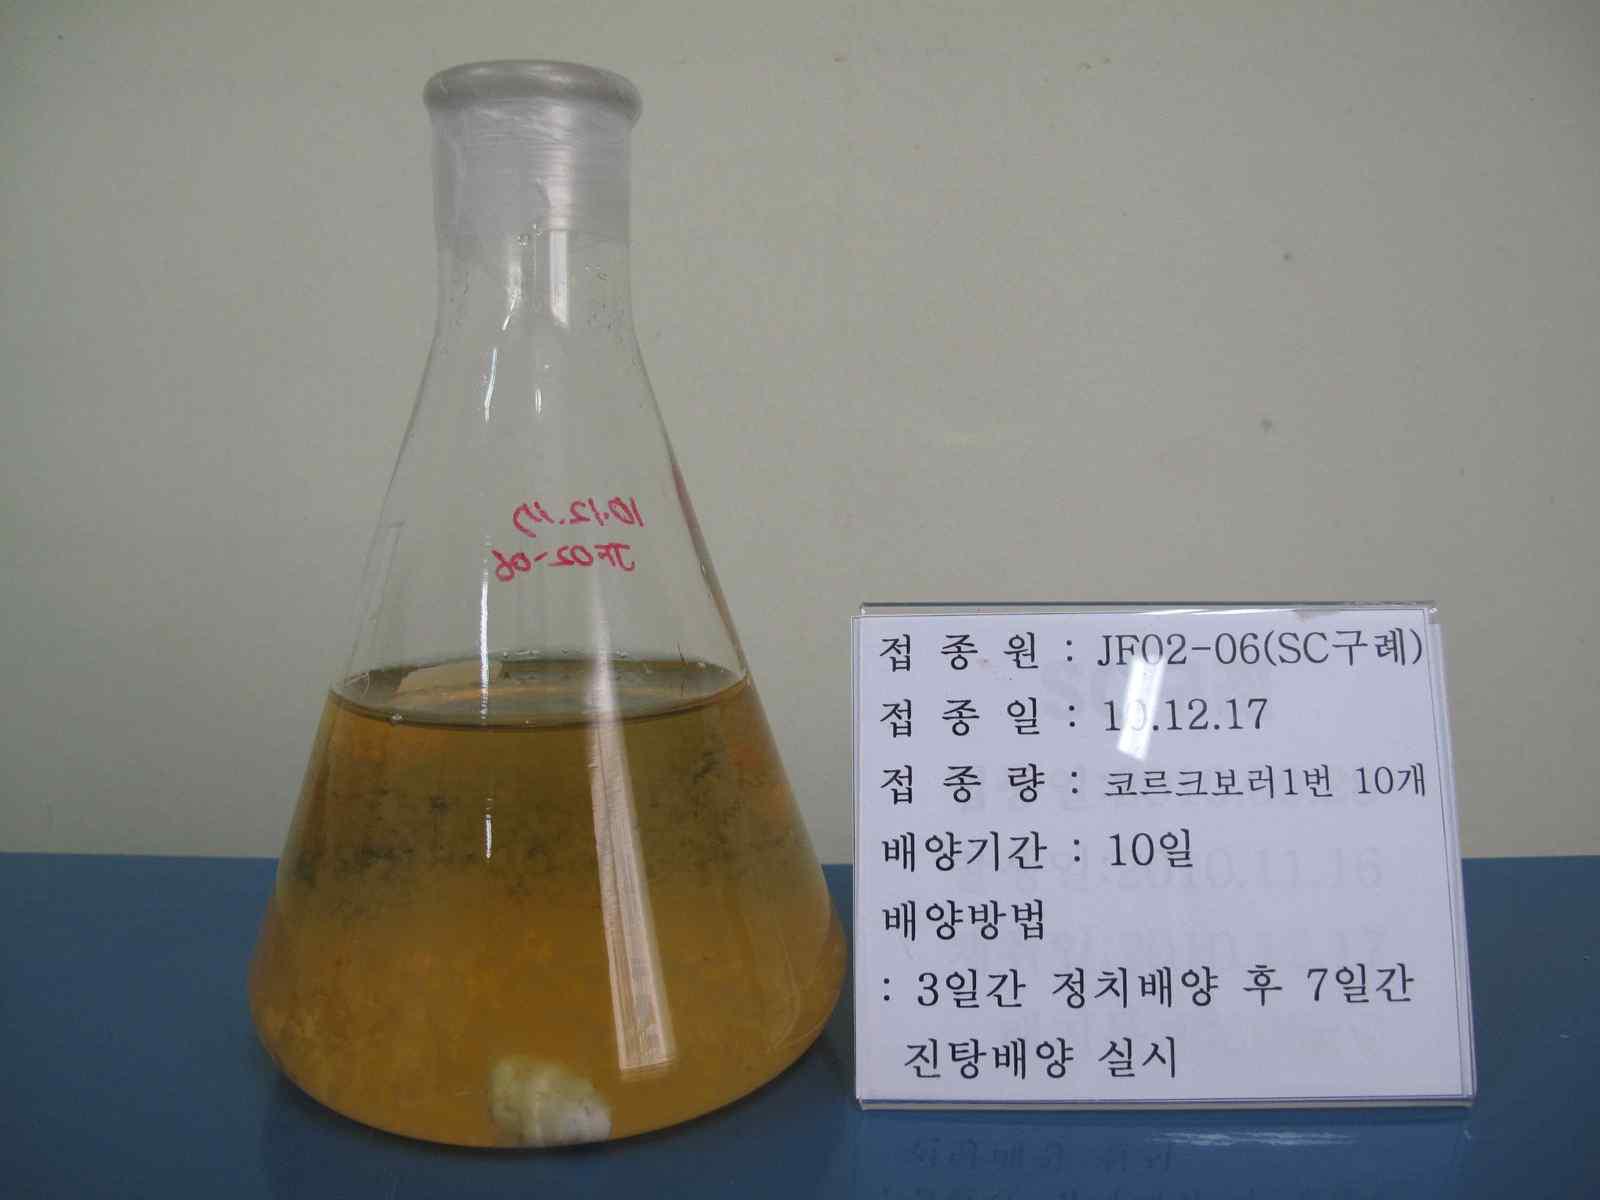 The cultured JF02-06 strain in liquid media for 10 days.